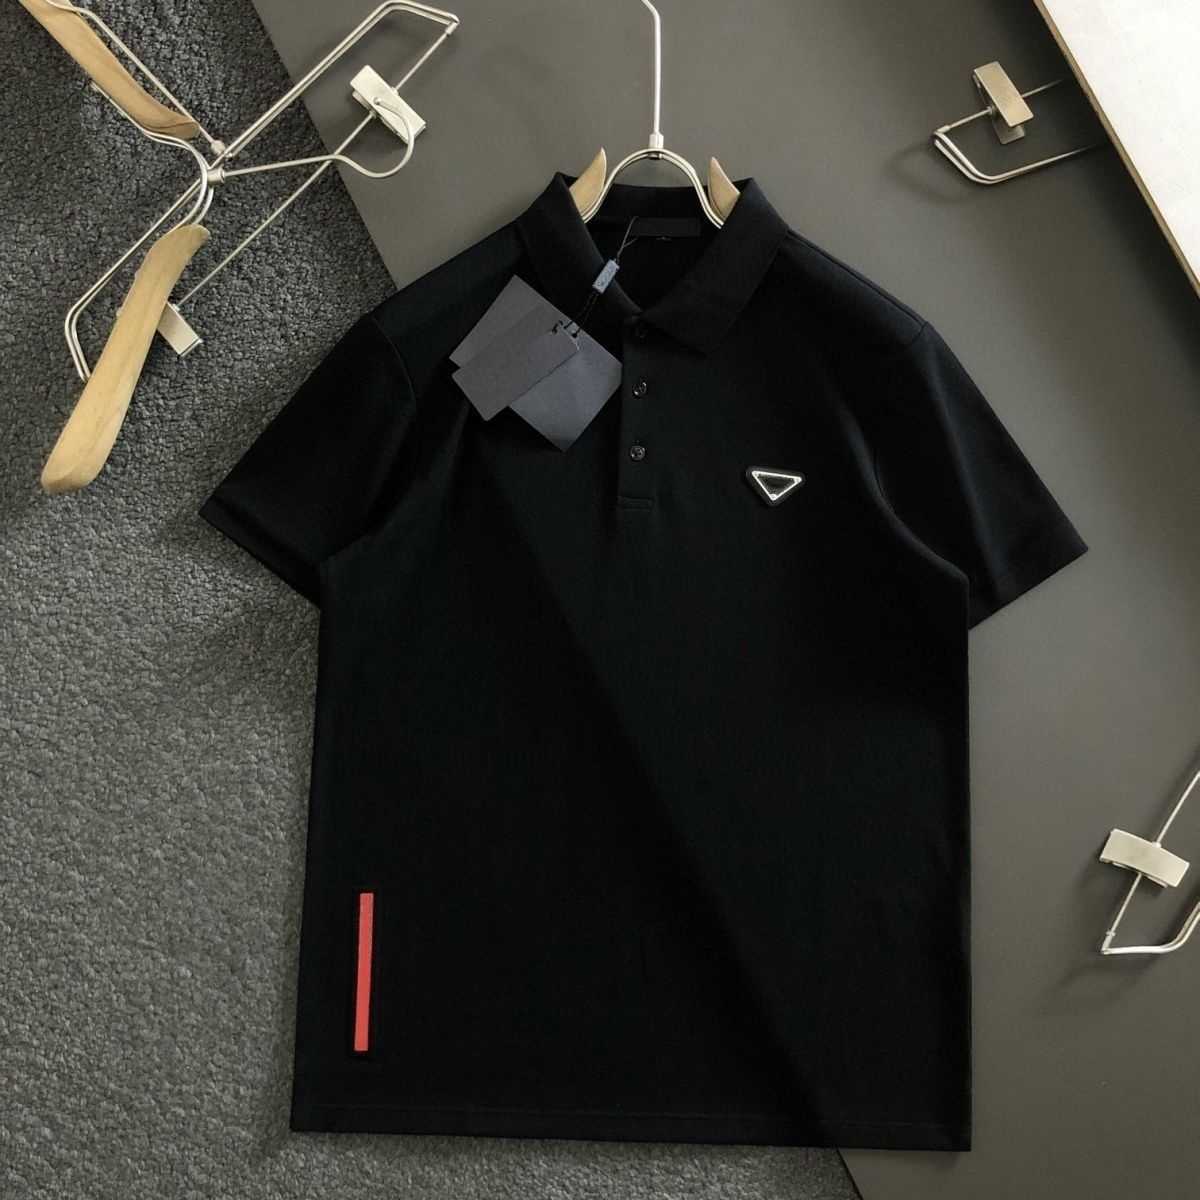 Men's summer lapel classic triangle standard casual polo shirt short sleeve, polyester fabric soft, comfortable and breathable, loose casual fashion.